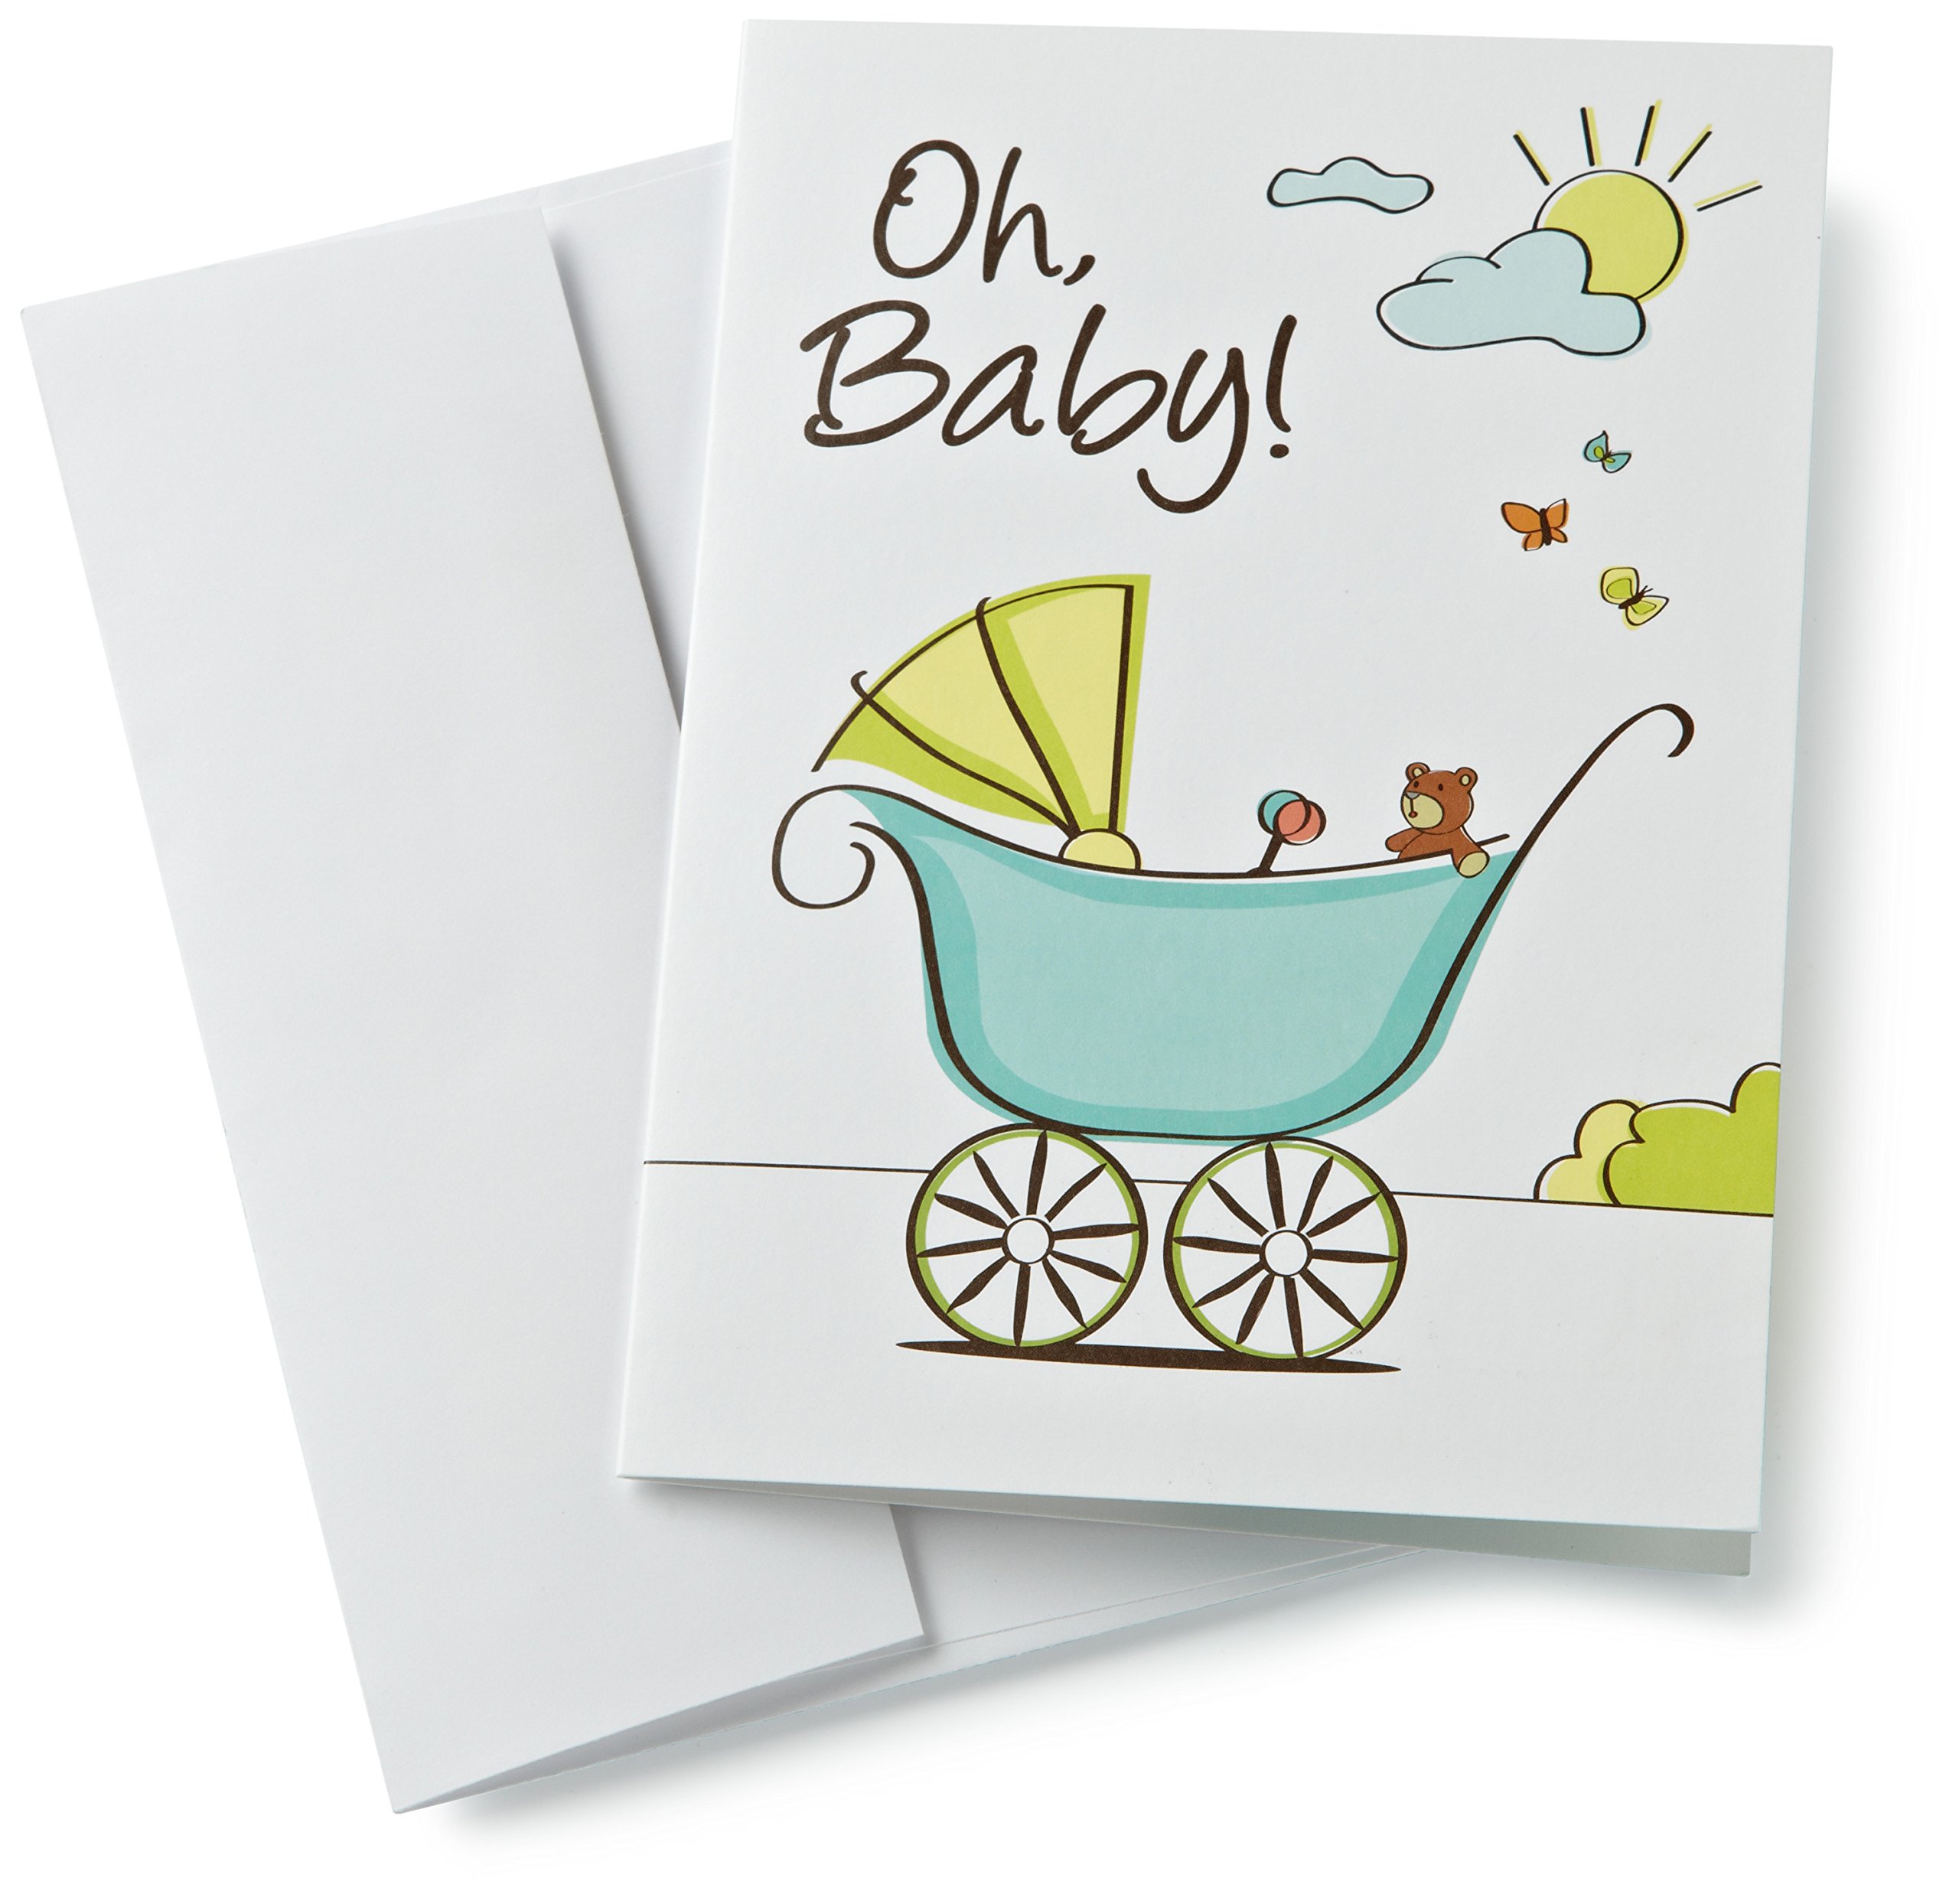 Amazon.com Gift Card in a Greeting Card (Various Designs)